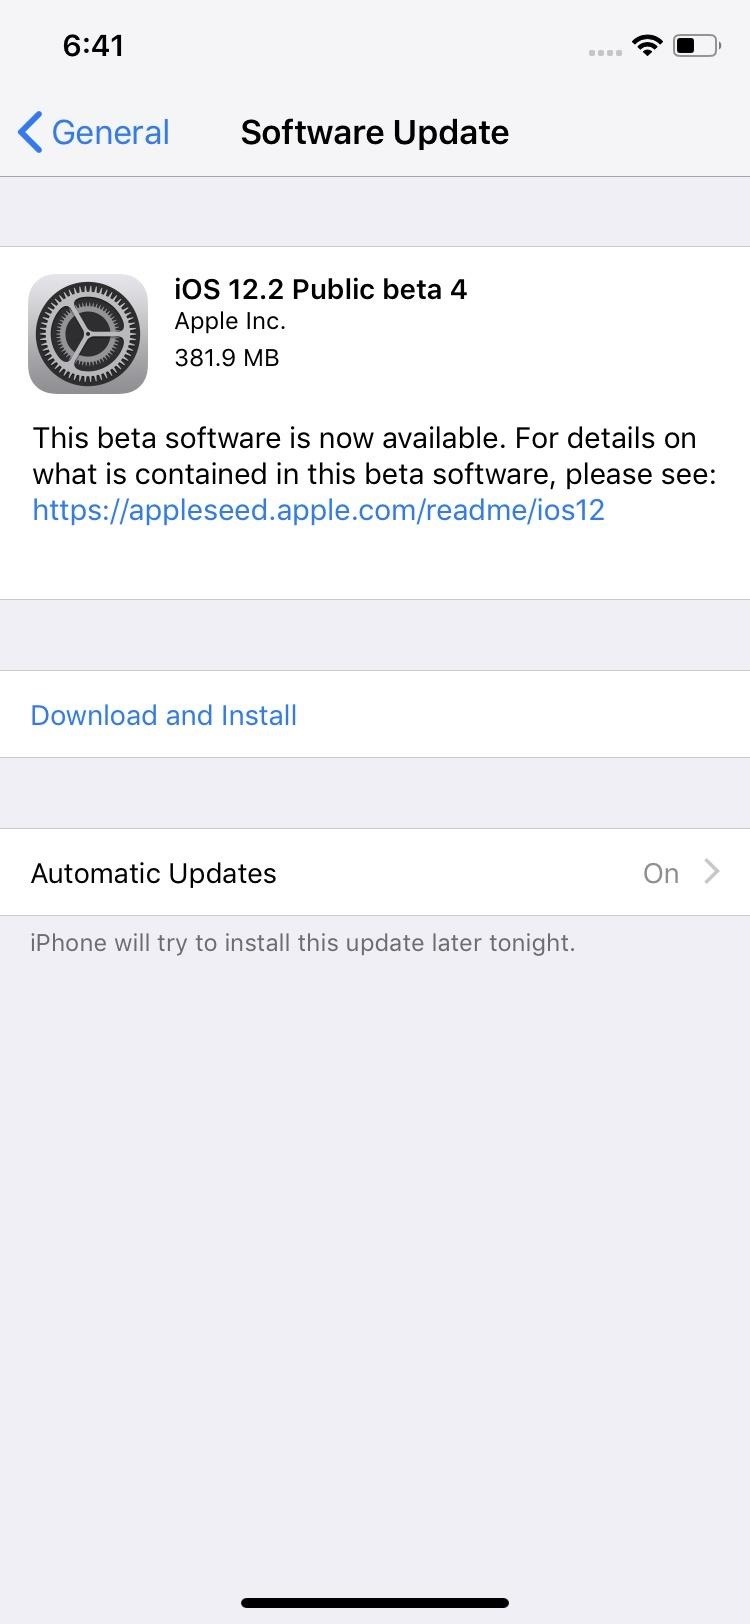 Apple Releases iOS 12.2 Public Beta 4 to Software Testers Early, Includes New Icons & Other Small Tweaks